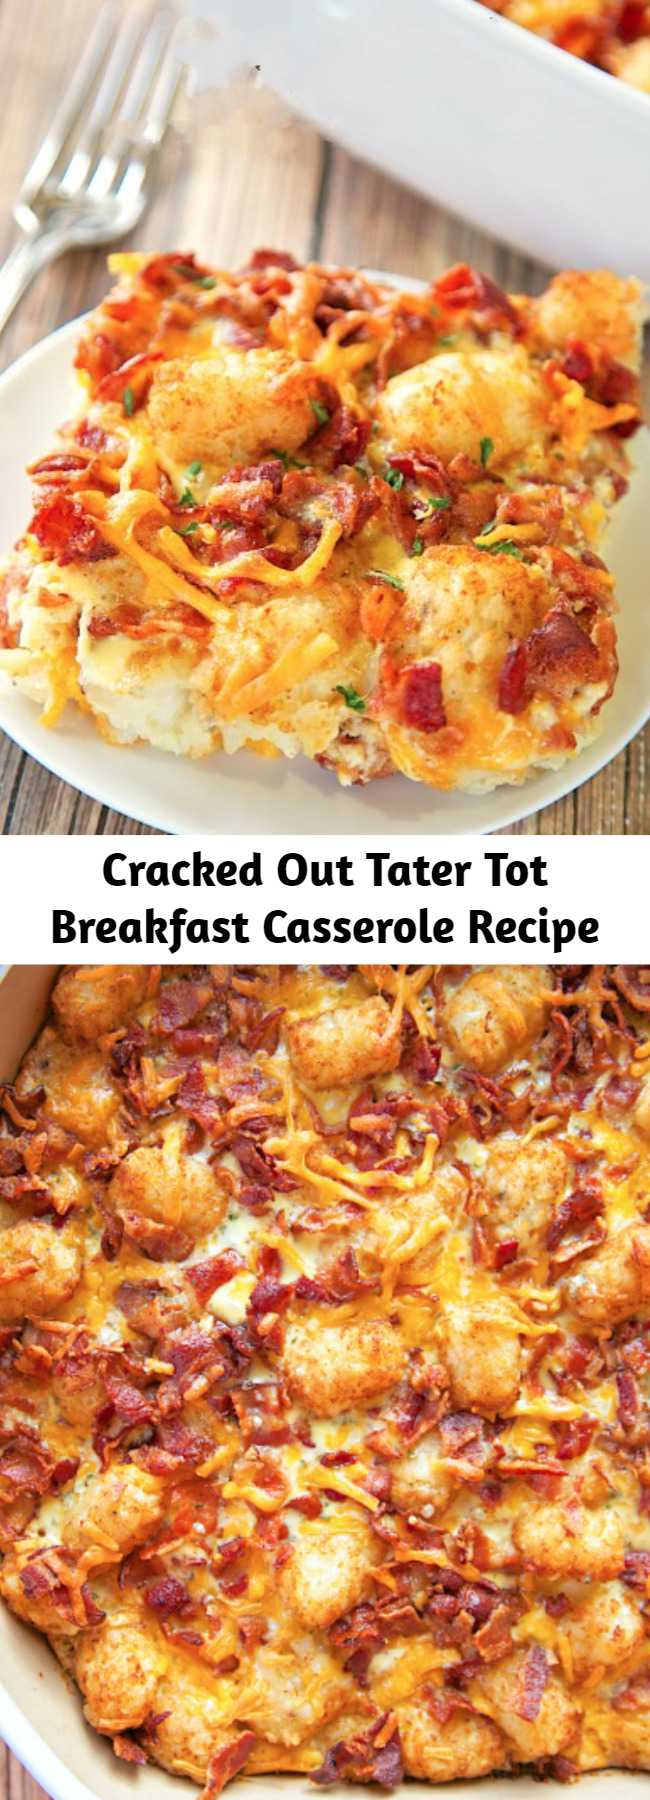 Cracked Out Tater Tot Breakfast Casserole Recipe - Great make-ahead recipe! Only 6 ingredients!! Bacon, cheddar cheese, tater tots, eggs, milk, Ranch mix. Can refrigerate or freeze for later. Great for breakfast. lunch or dinner. Everyone loves this easy breakfast casserole!! #breakfast #casserole #tatertots #bacon #freezermeal